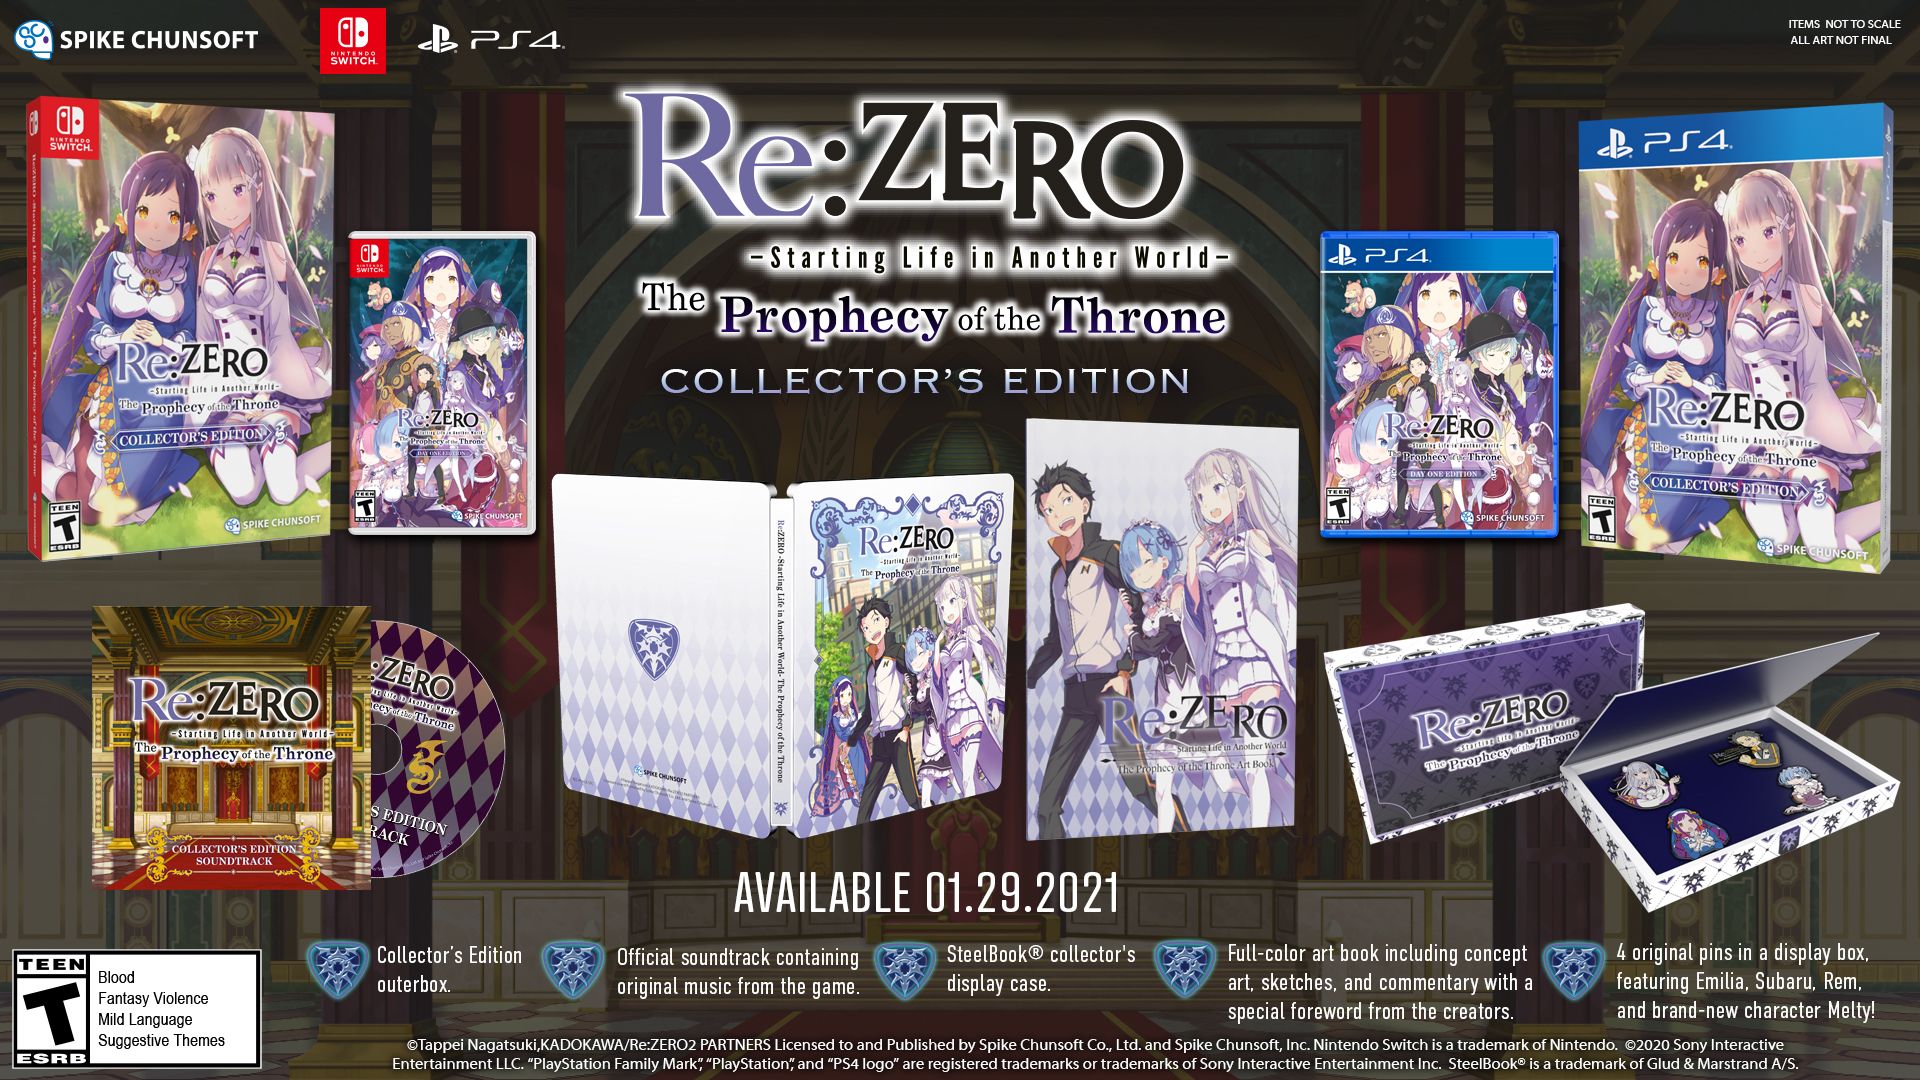 Re:Zero - Starting Life in Another World: The Prophecy of the Throne - Collector's Edition